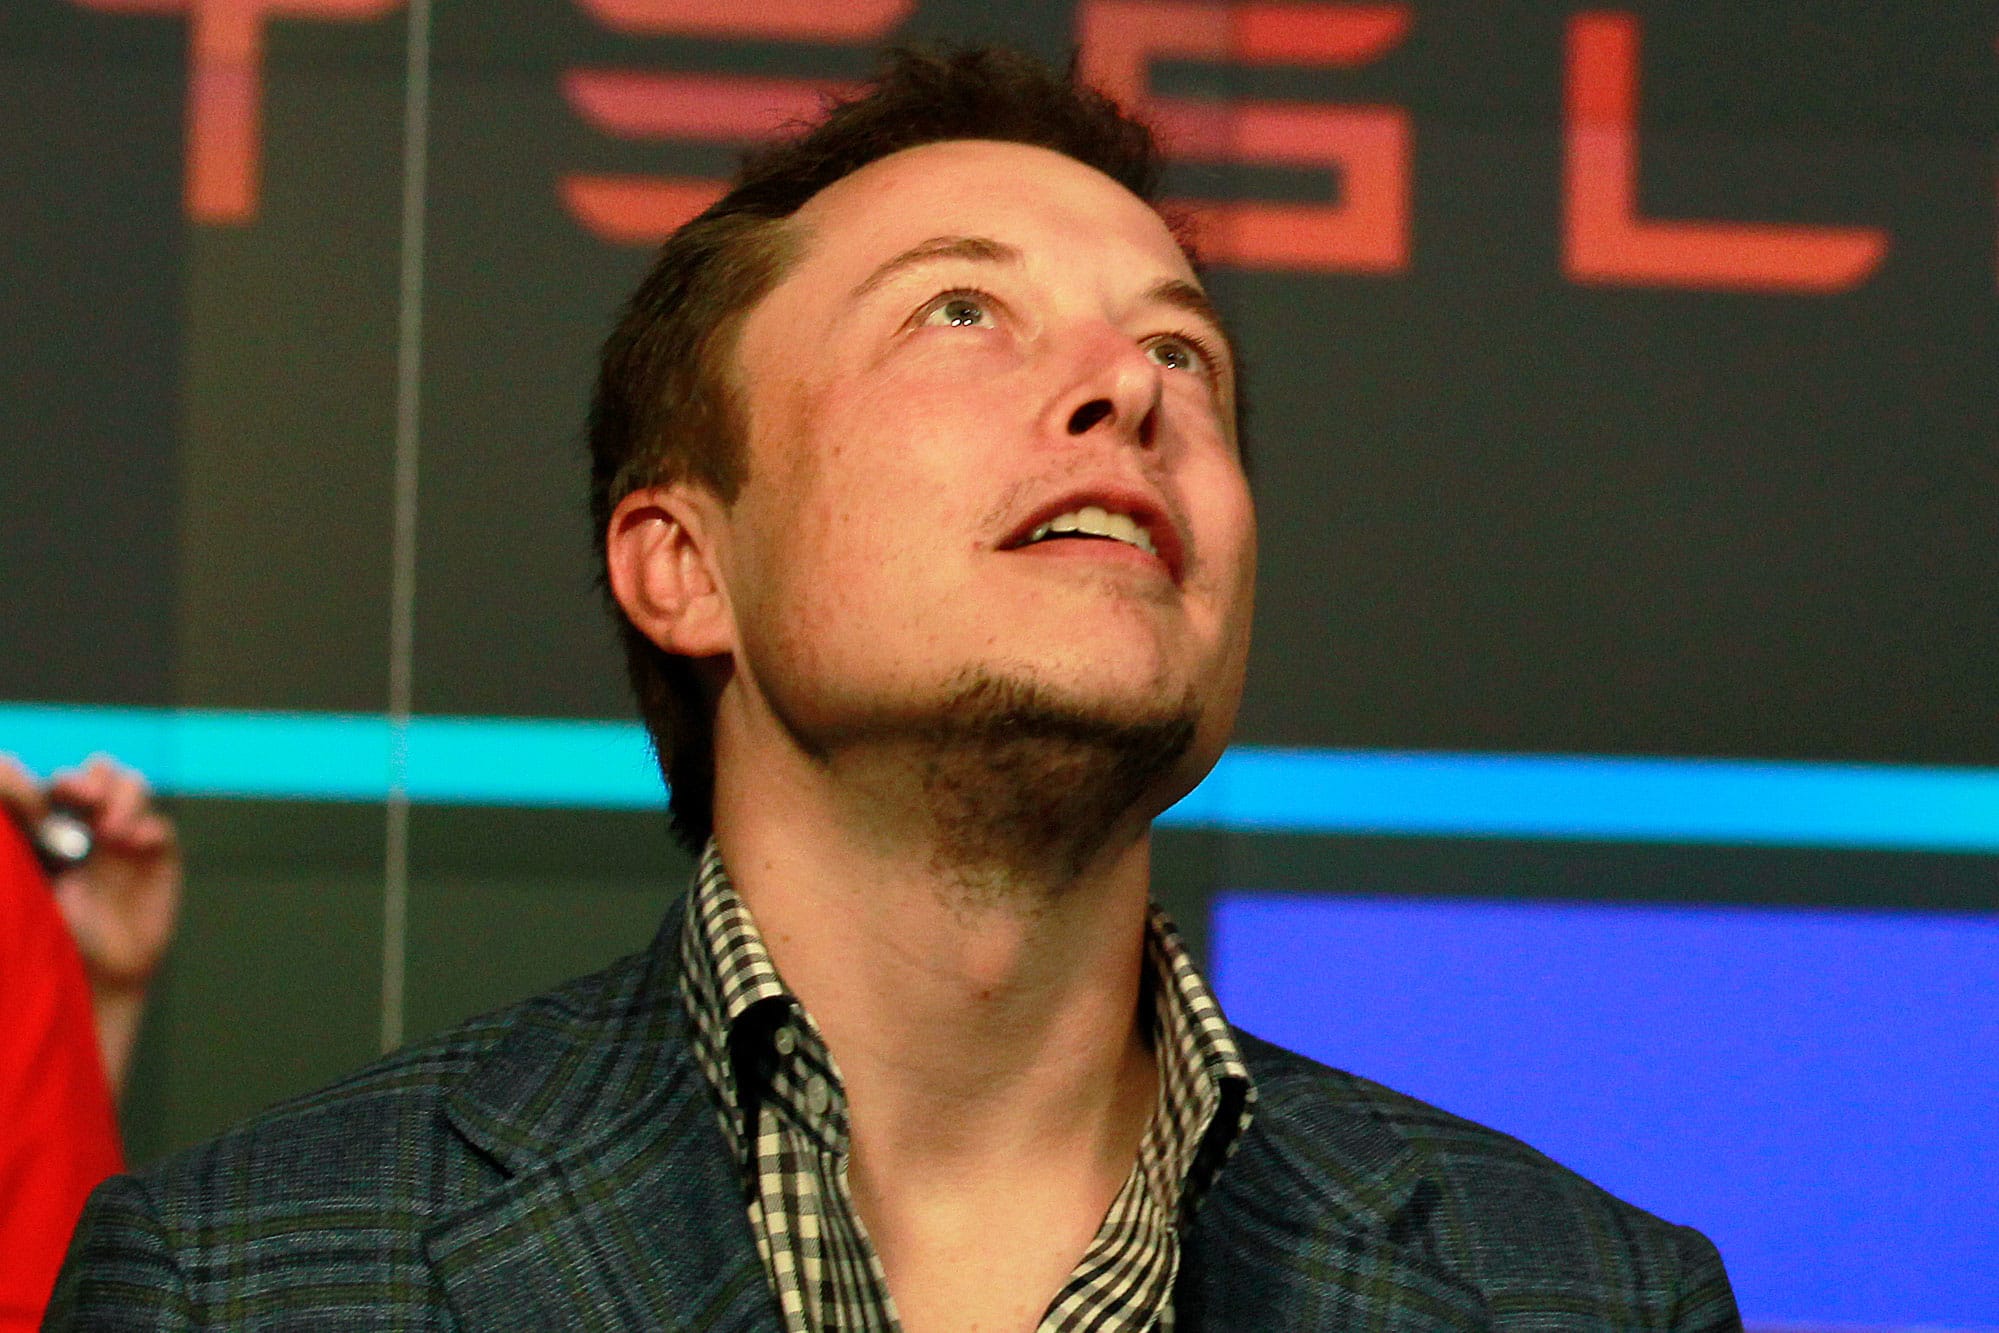 How a lot 5% invested in Tesla would’ve earned for index fund investor